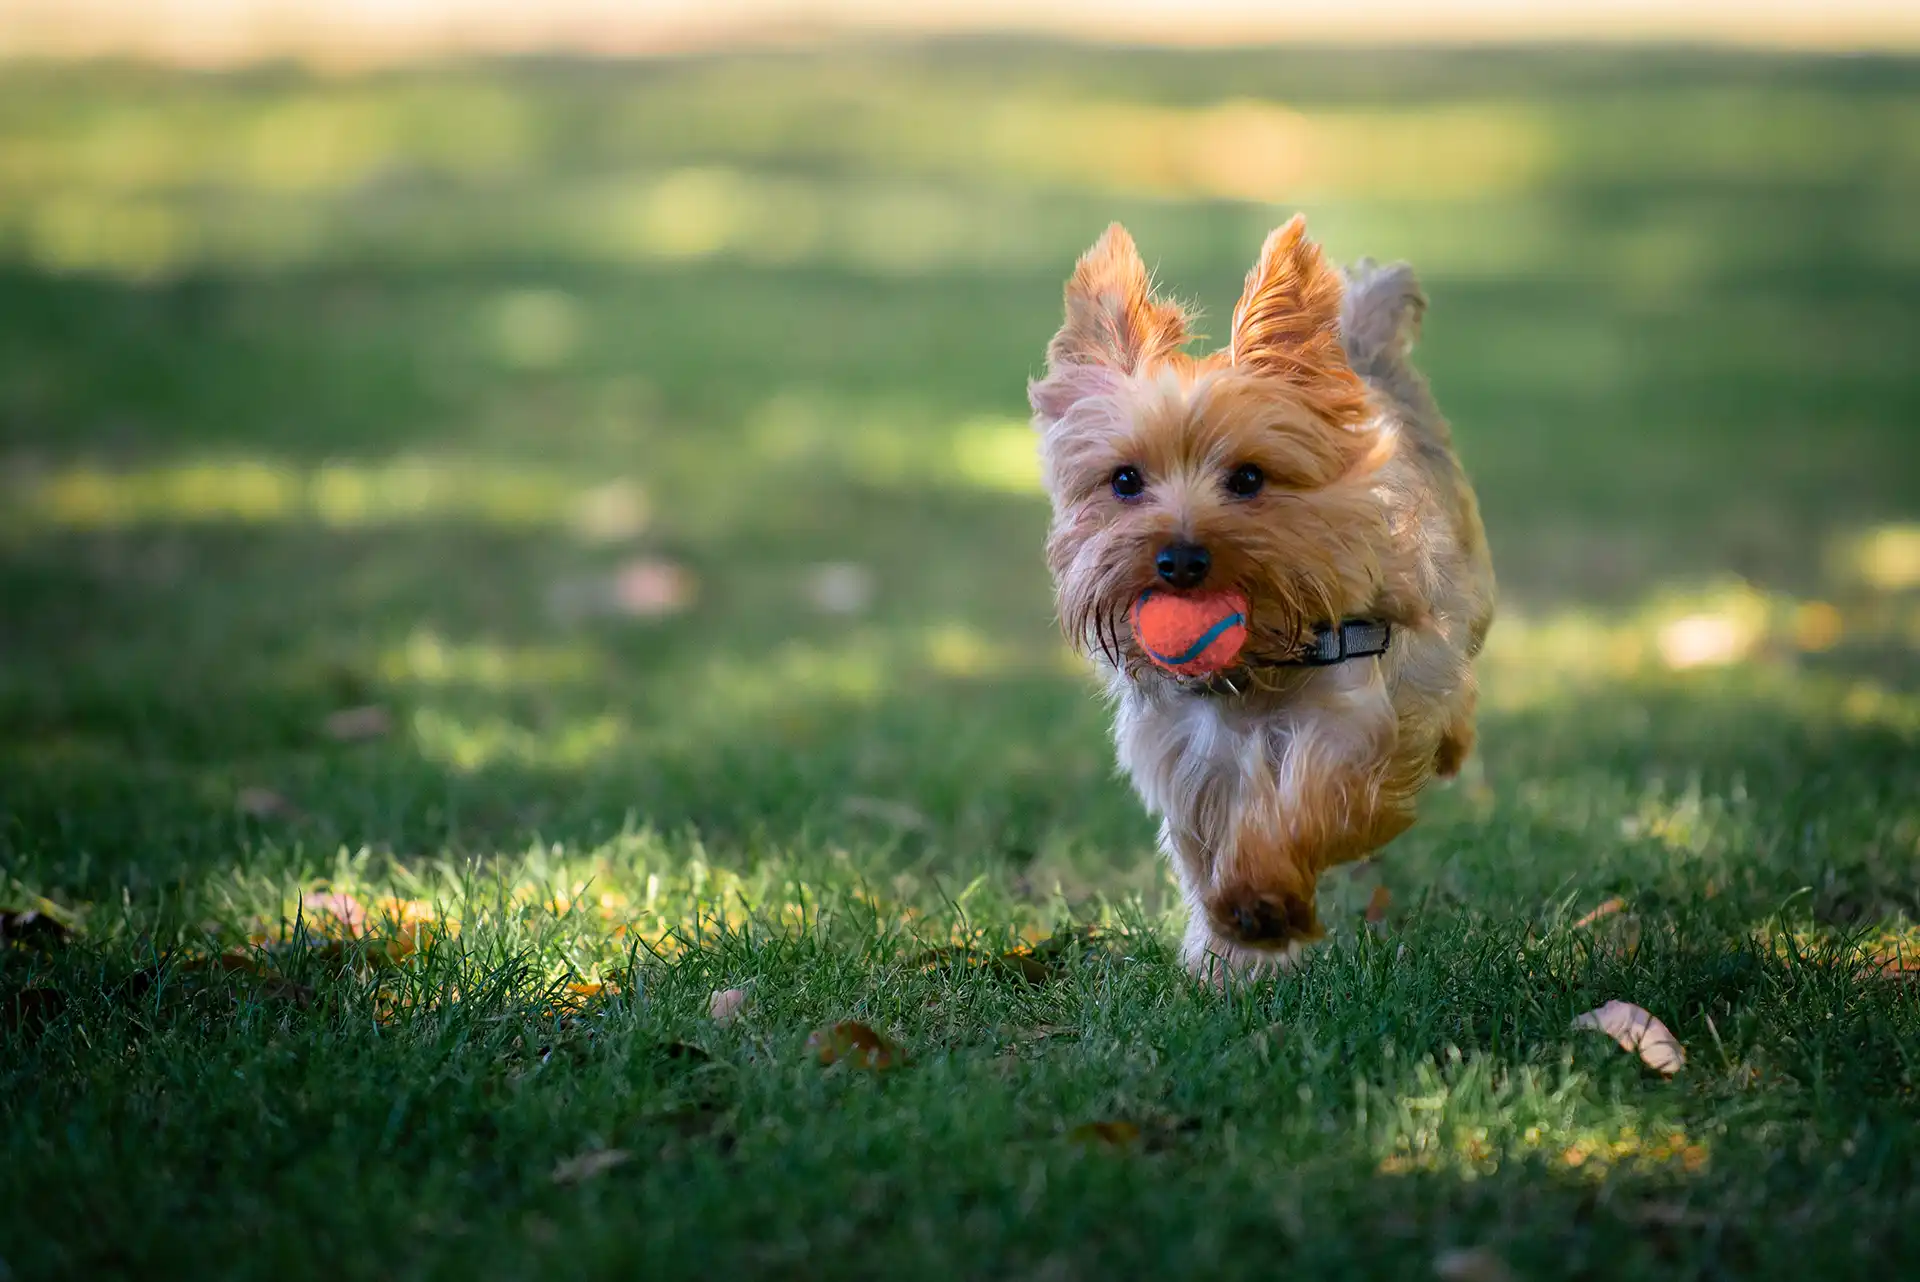 Dog running with a ball in its mouth